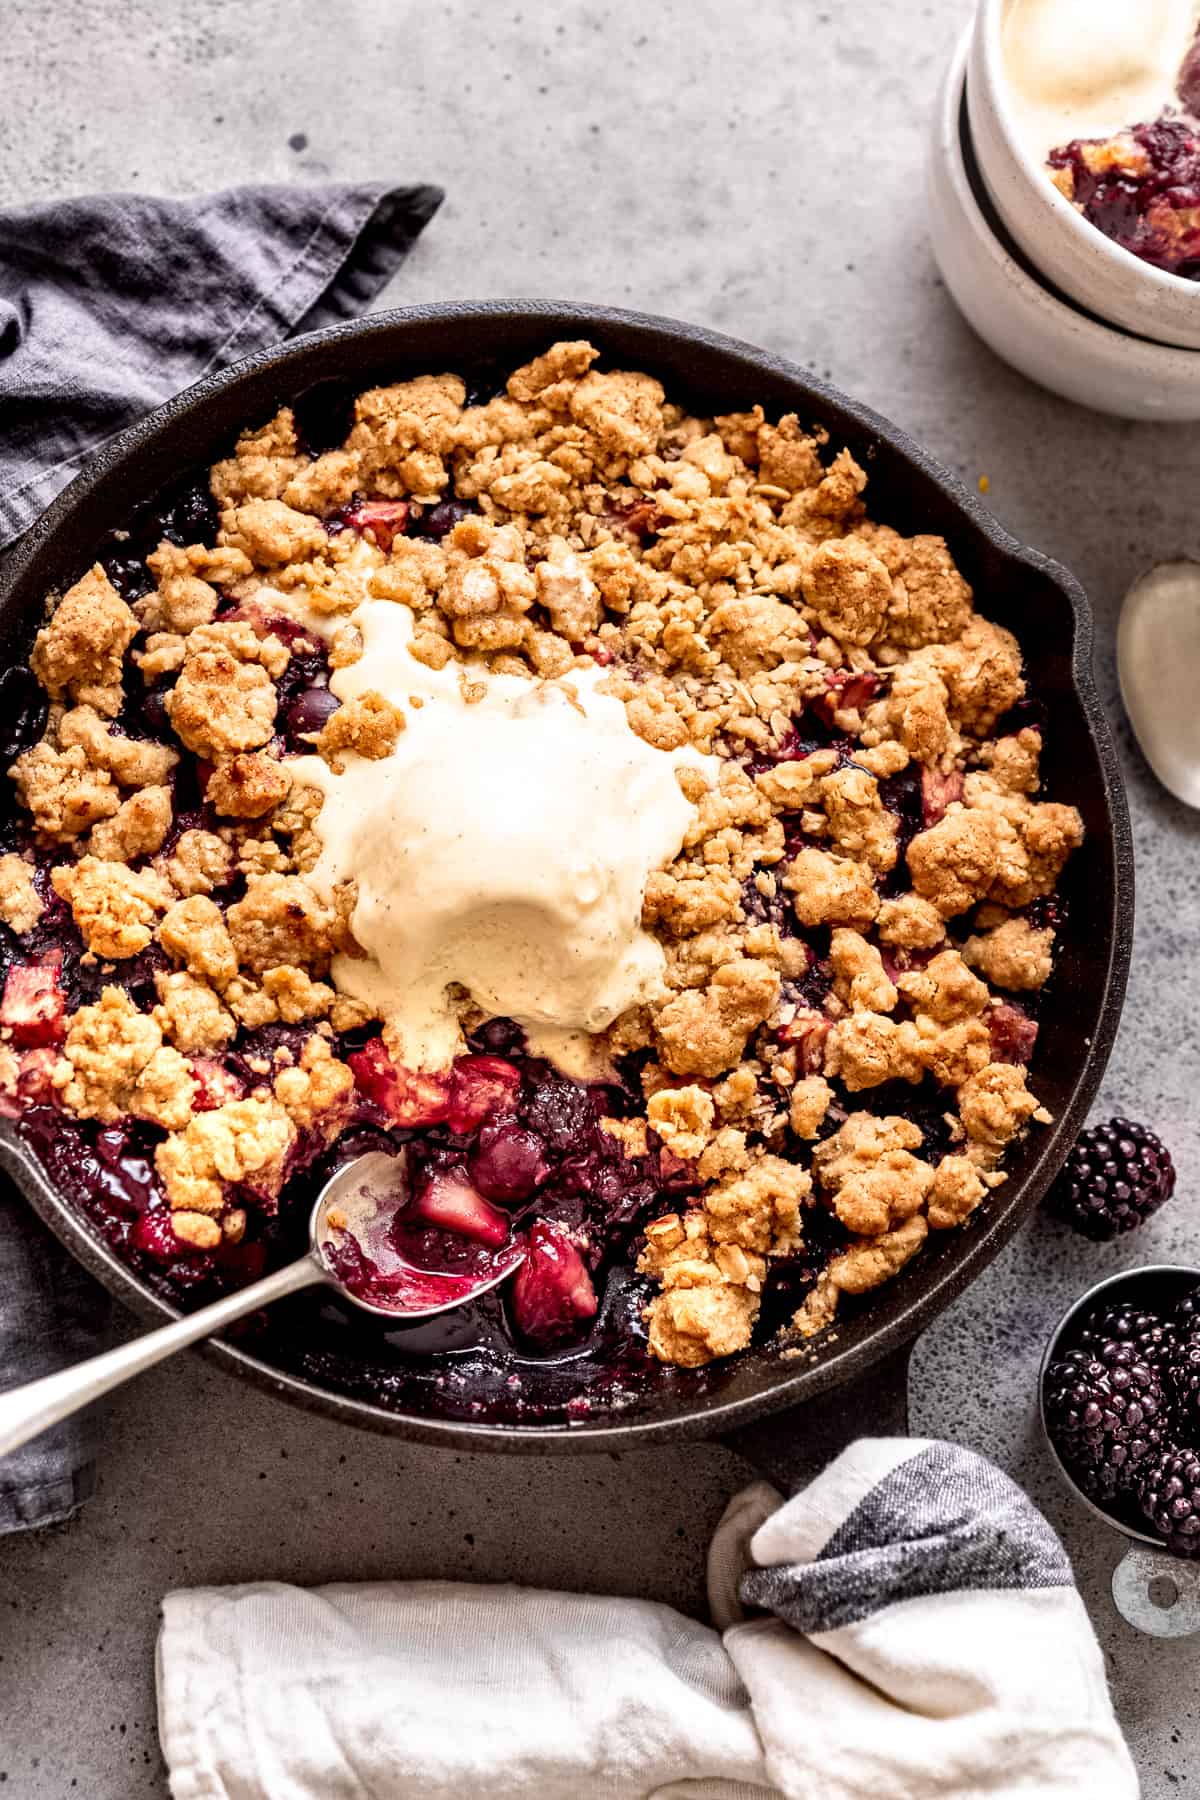 Apple and blackberry crumble in a skillet with ice cream.